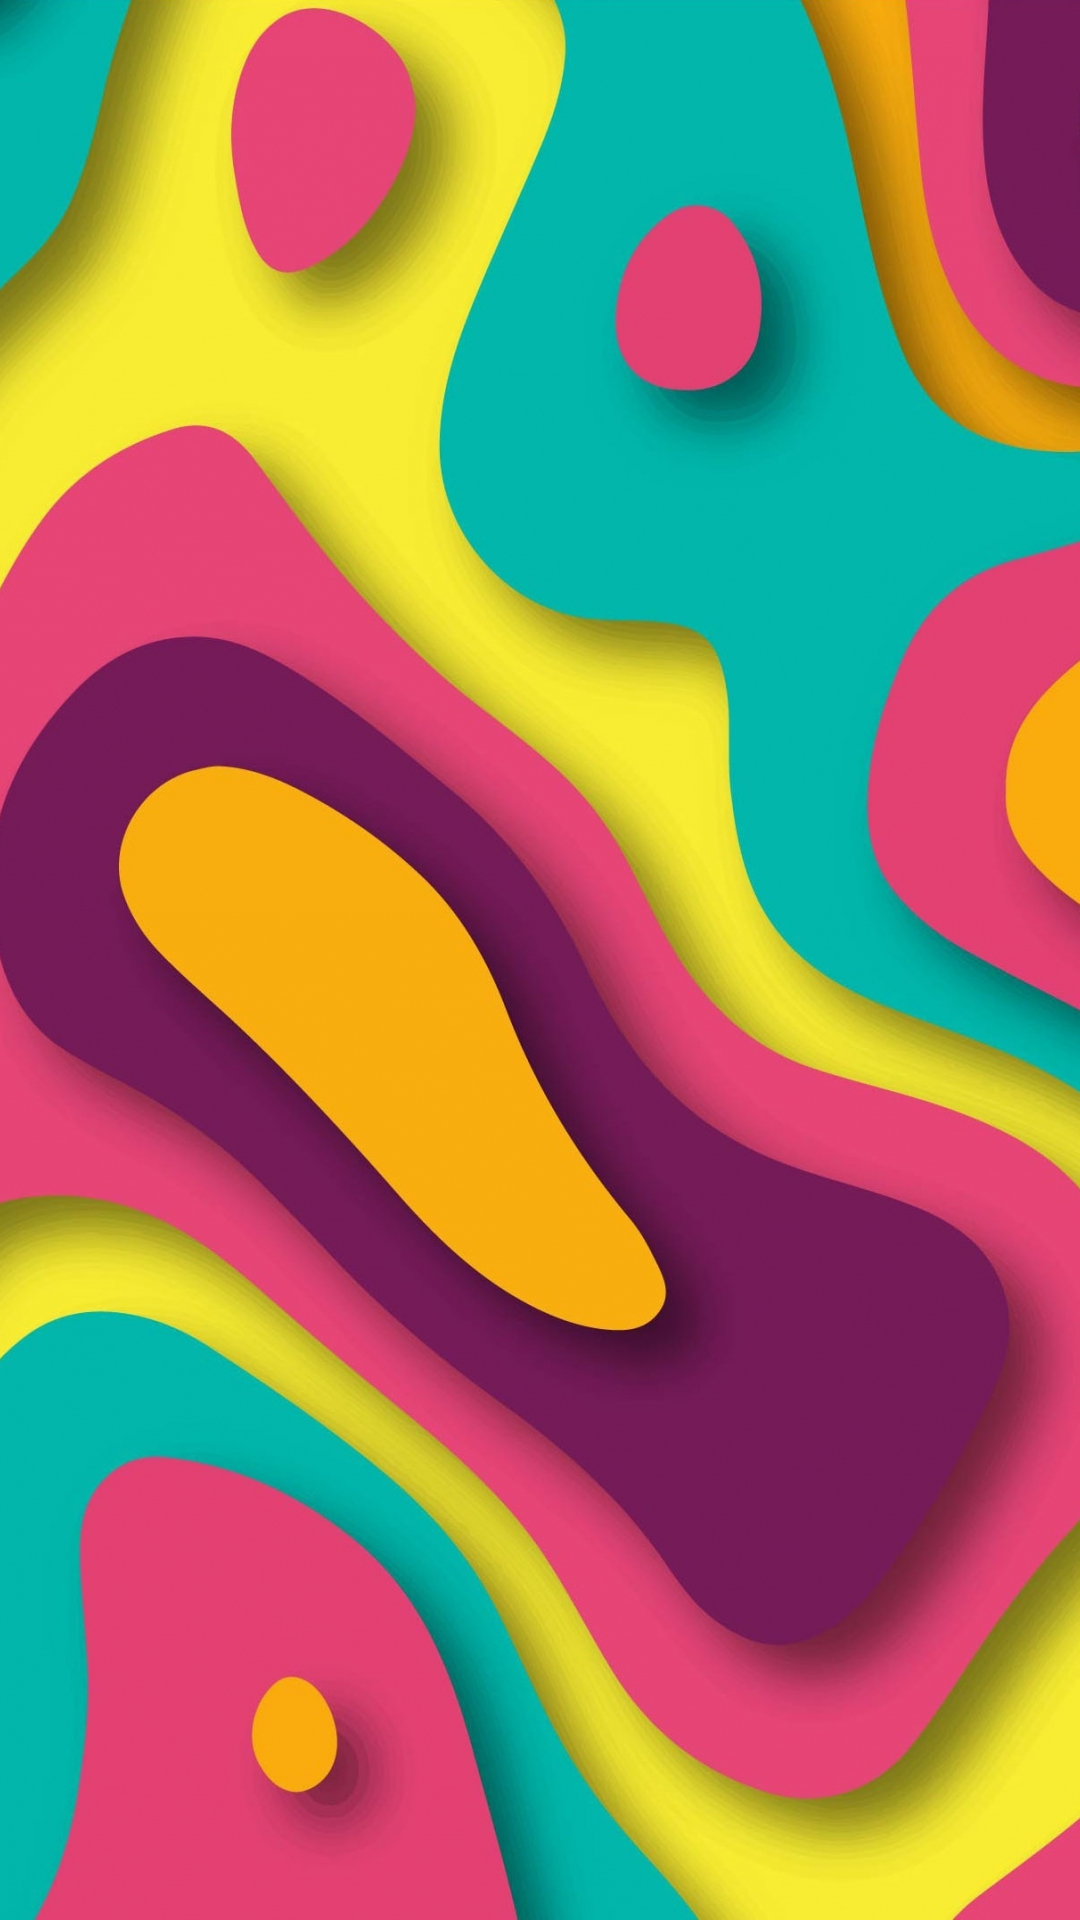 A colorful abstract pattern with different shapes - Colorful